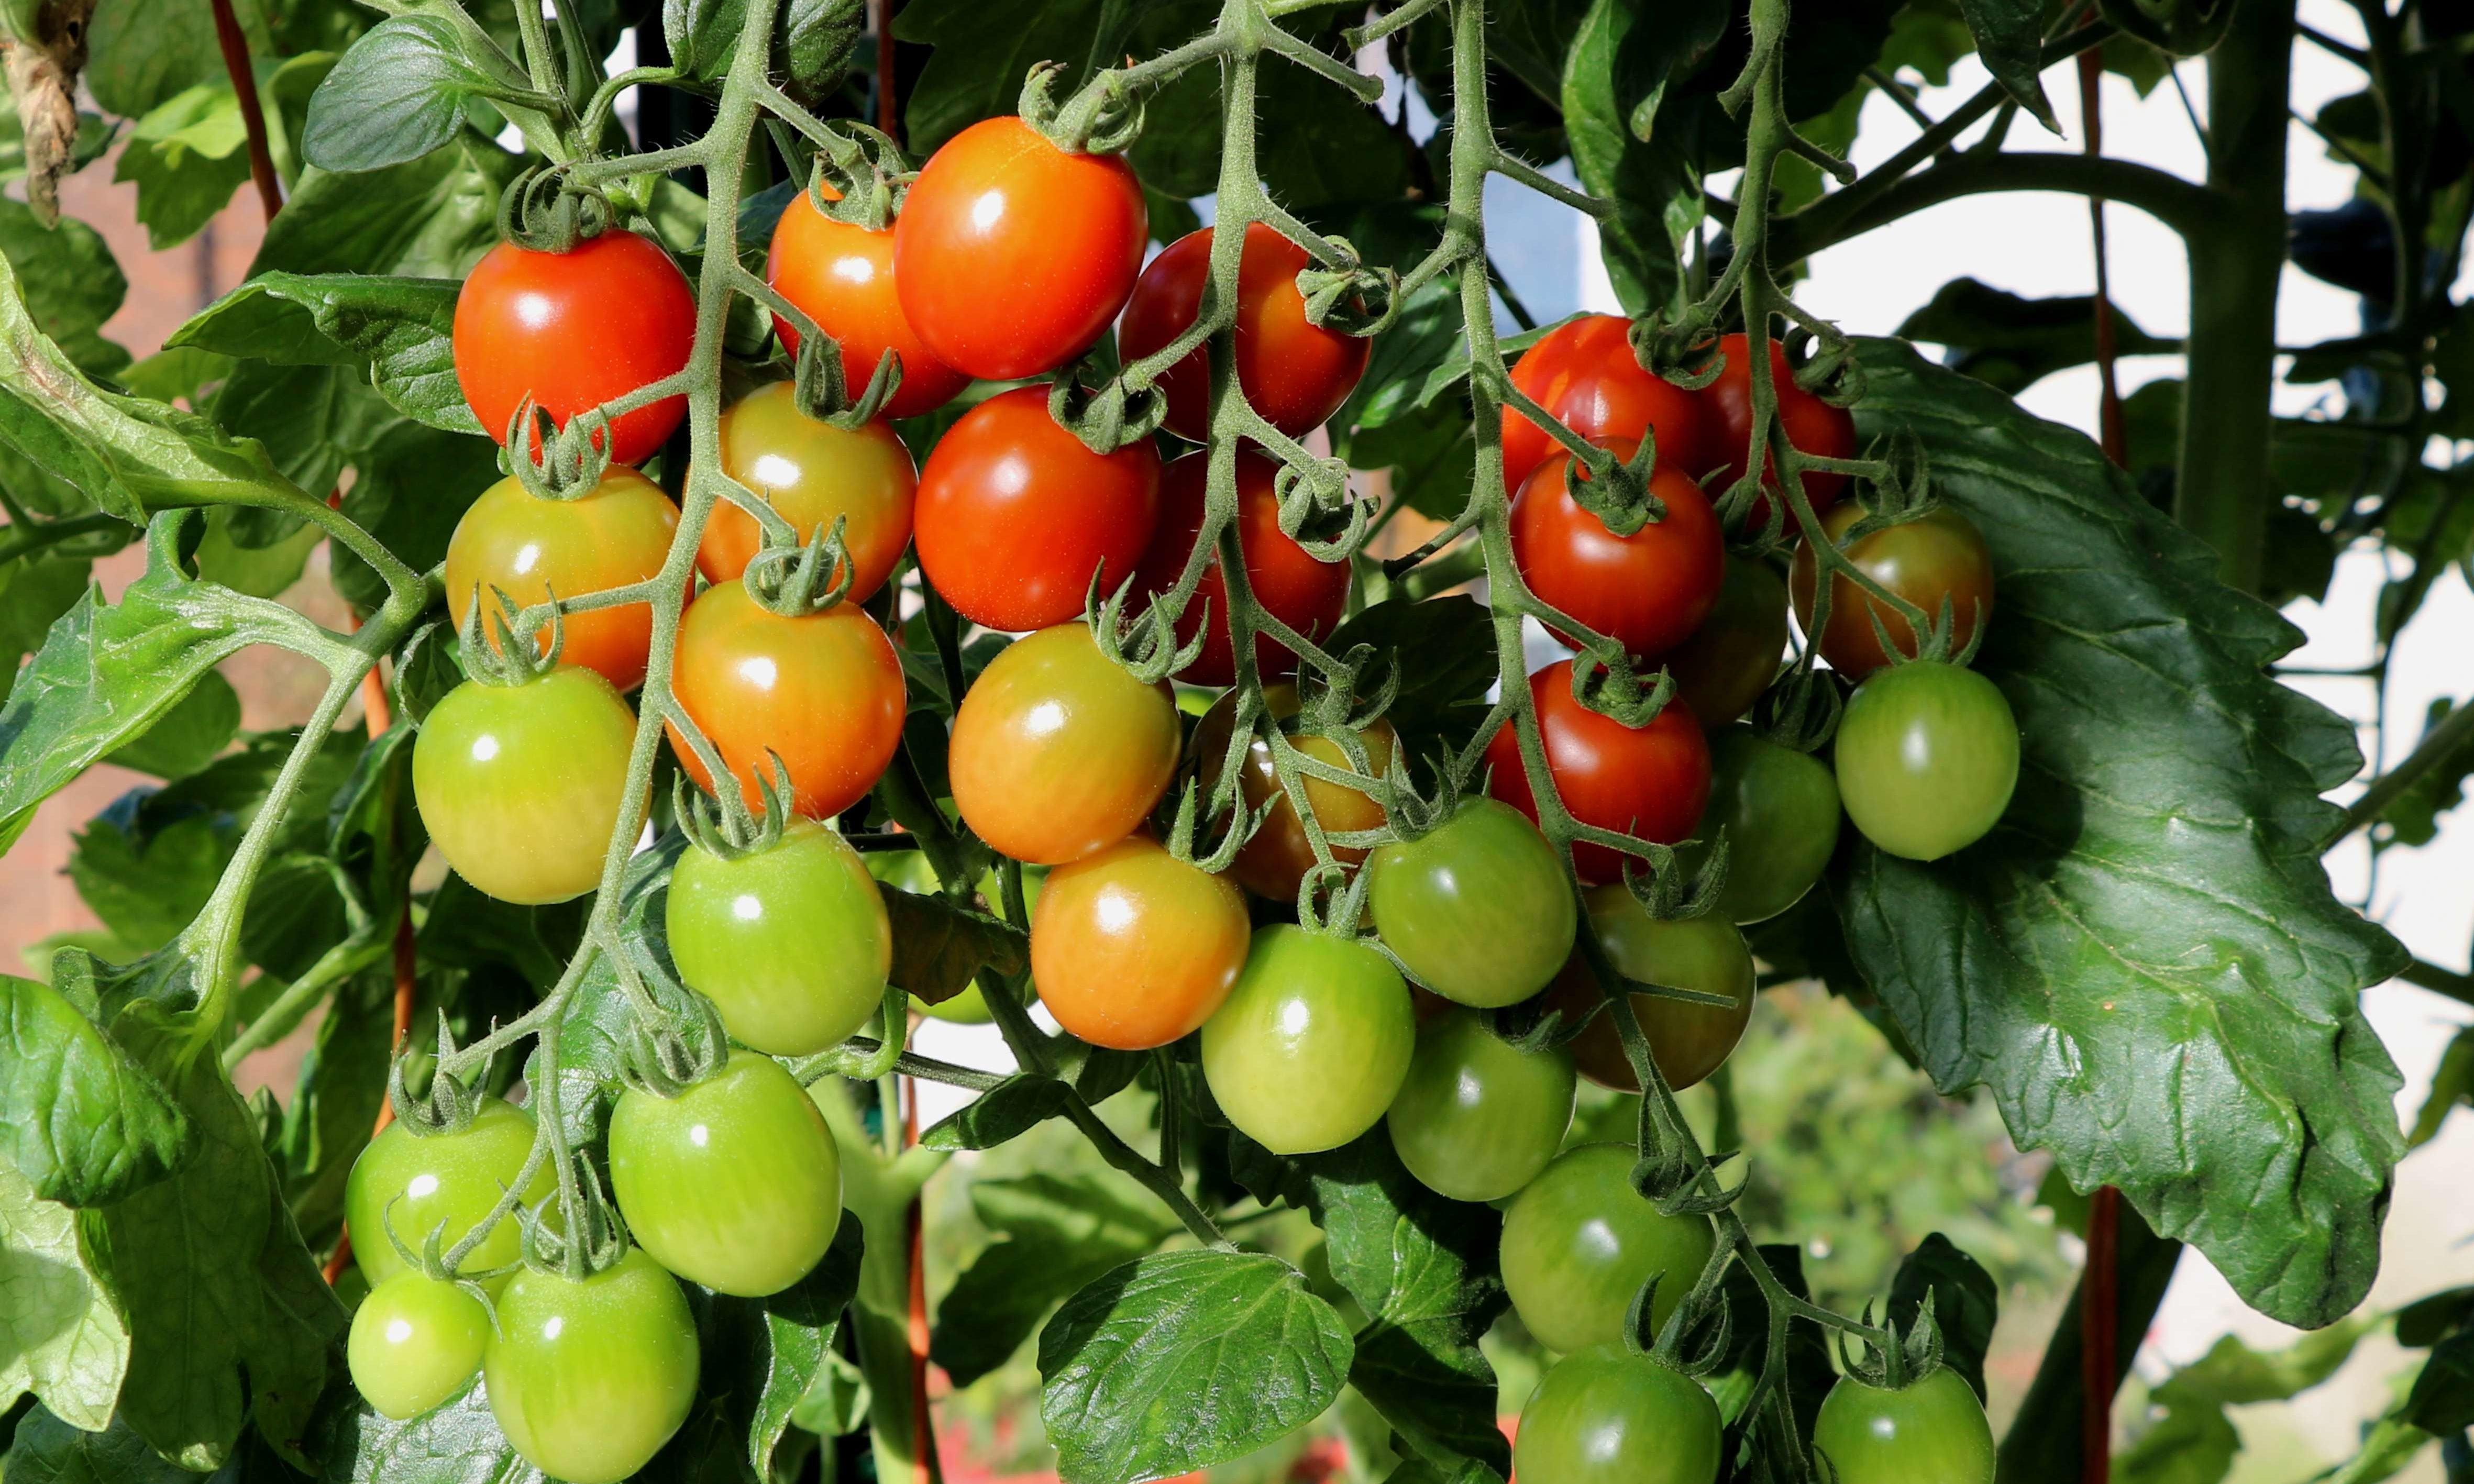 Still time for cherry tomatoes to ripen up